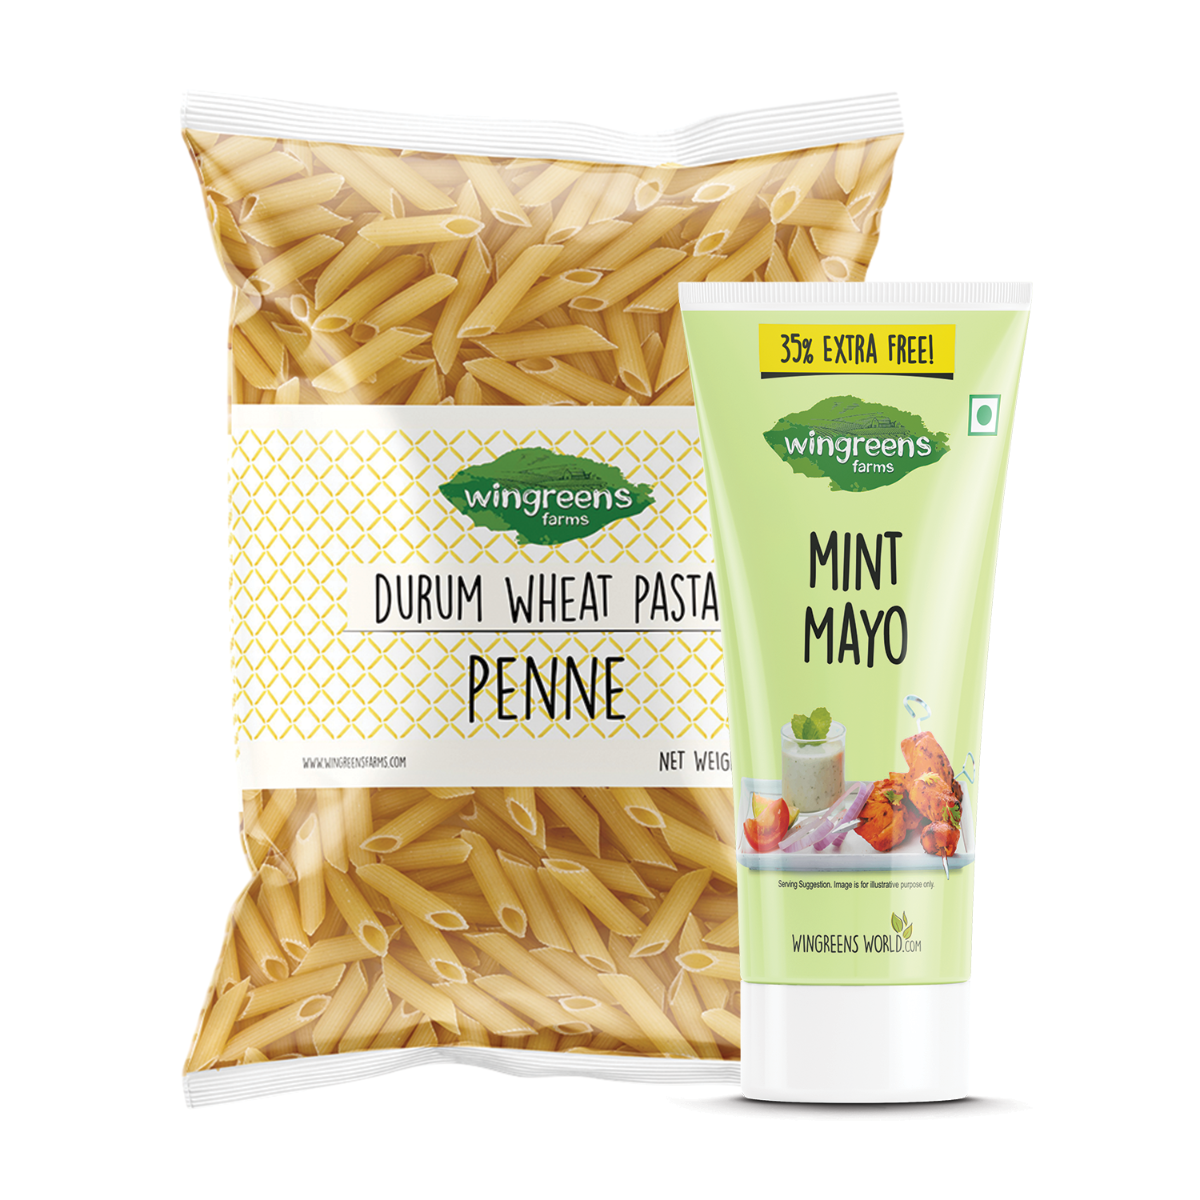 Penne (400g) with Mint Mayo (180g)